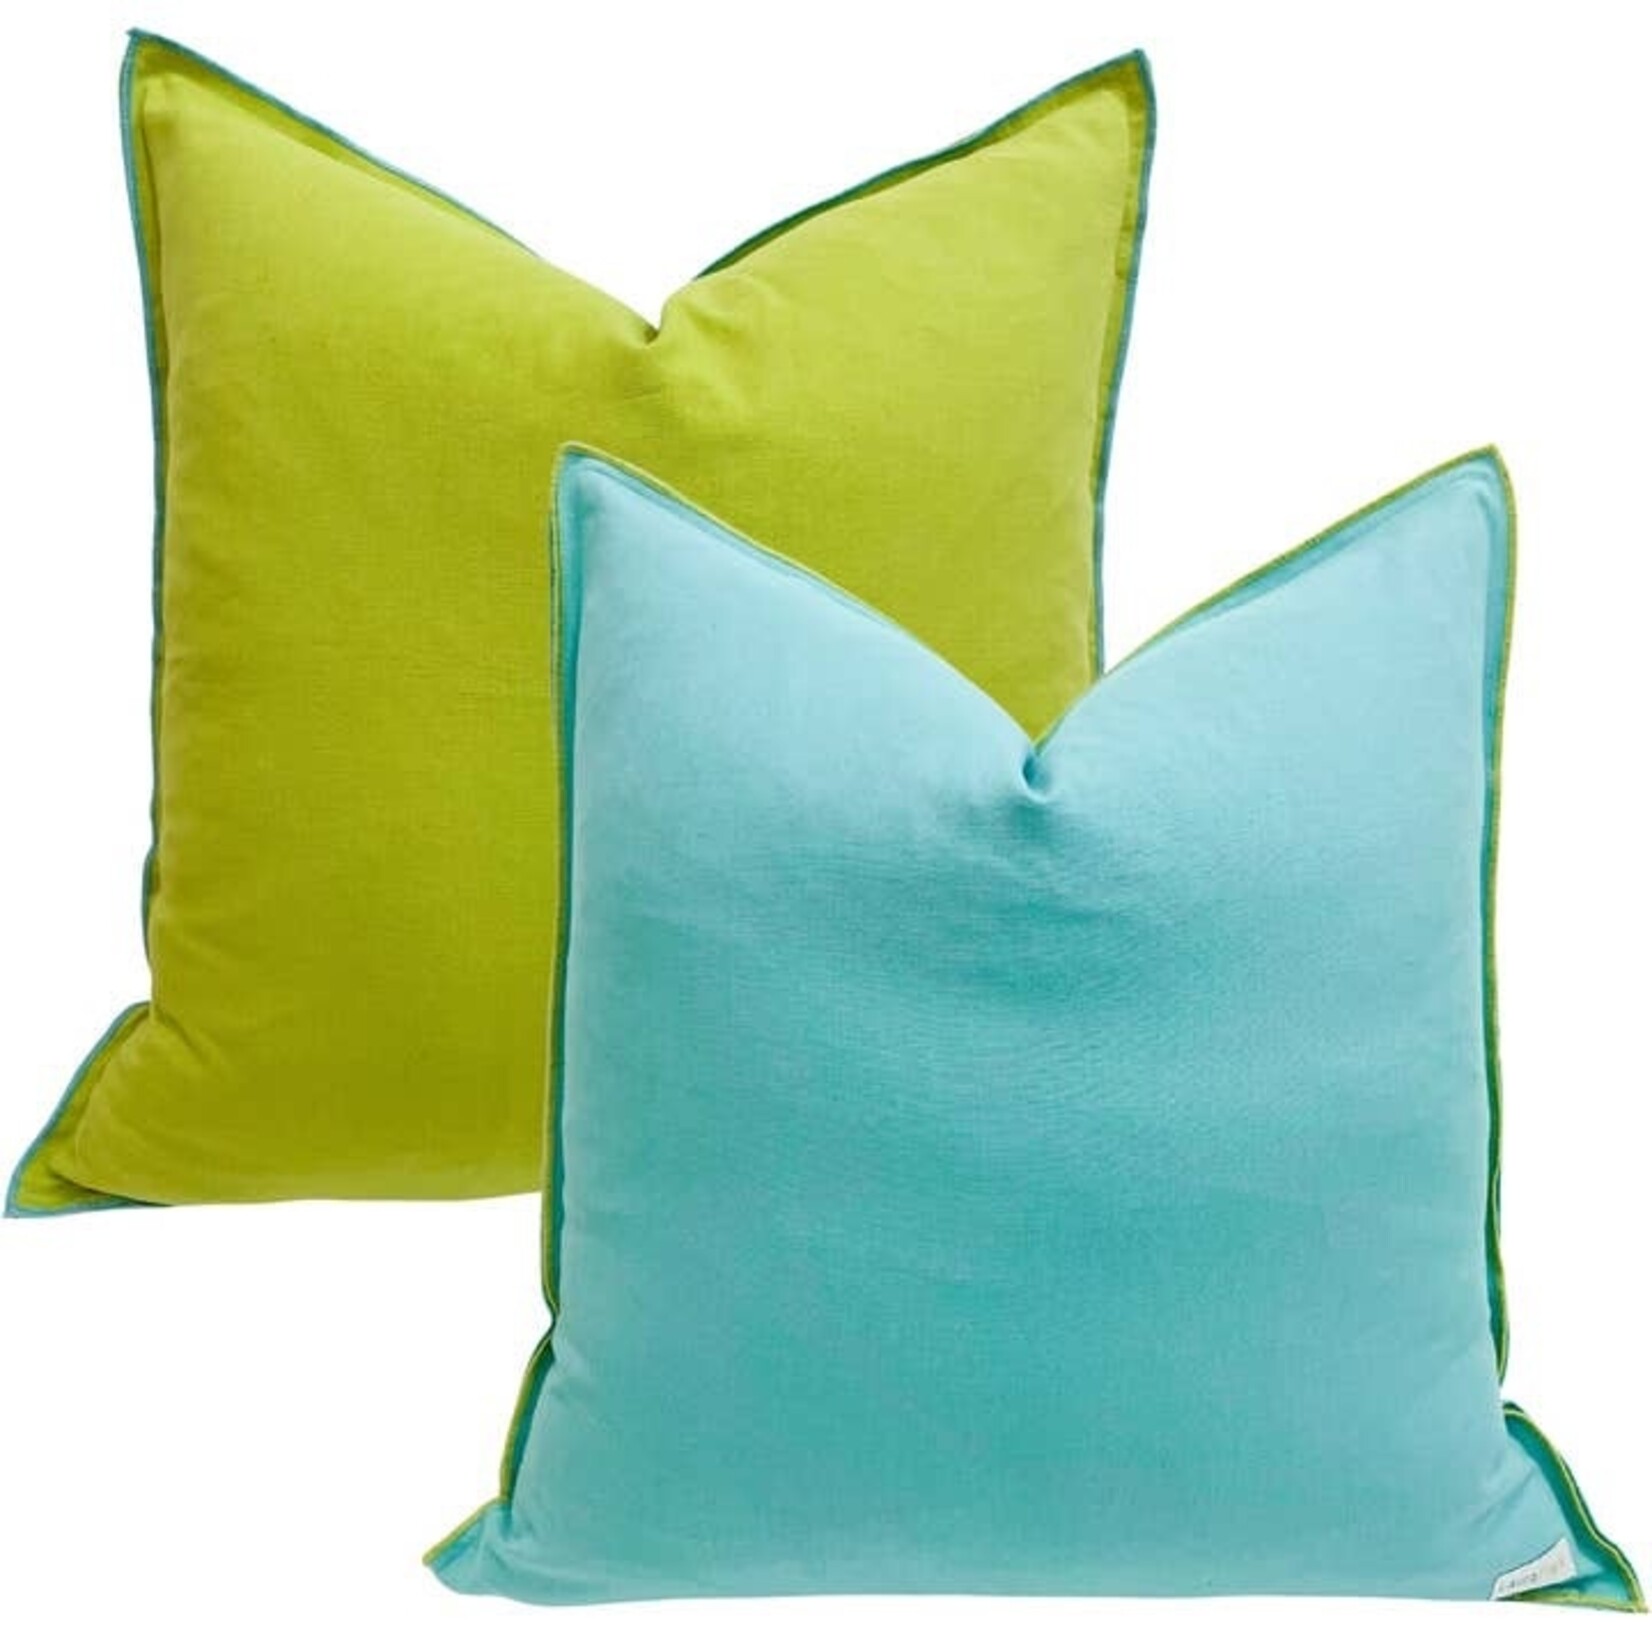 Two-Toned 22x22" Pillows